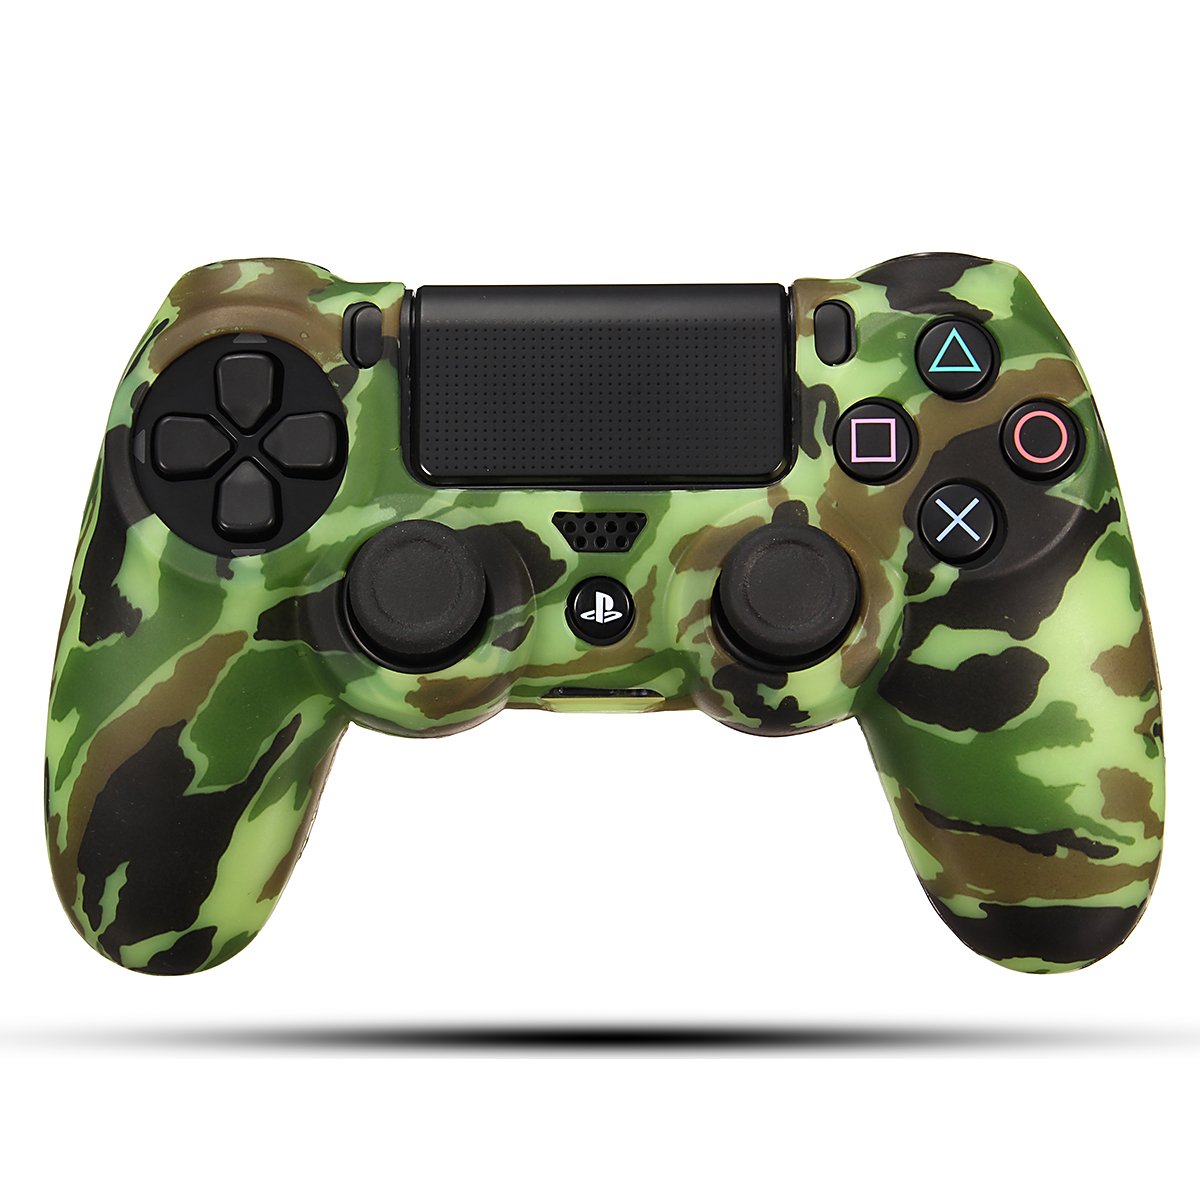 Durable Decal Camouflage Grip Cover Case Silicone Rubber Soft Skin Protector for Playstation 4 for Dualshock 4 Gamepad 2